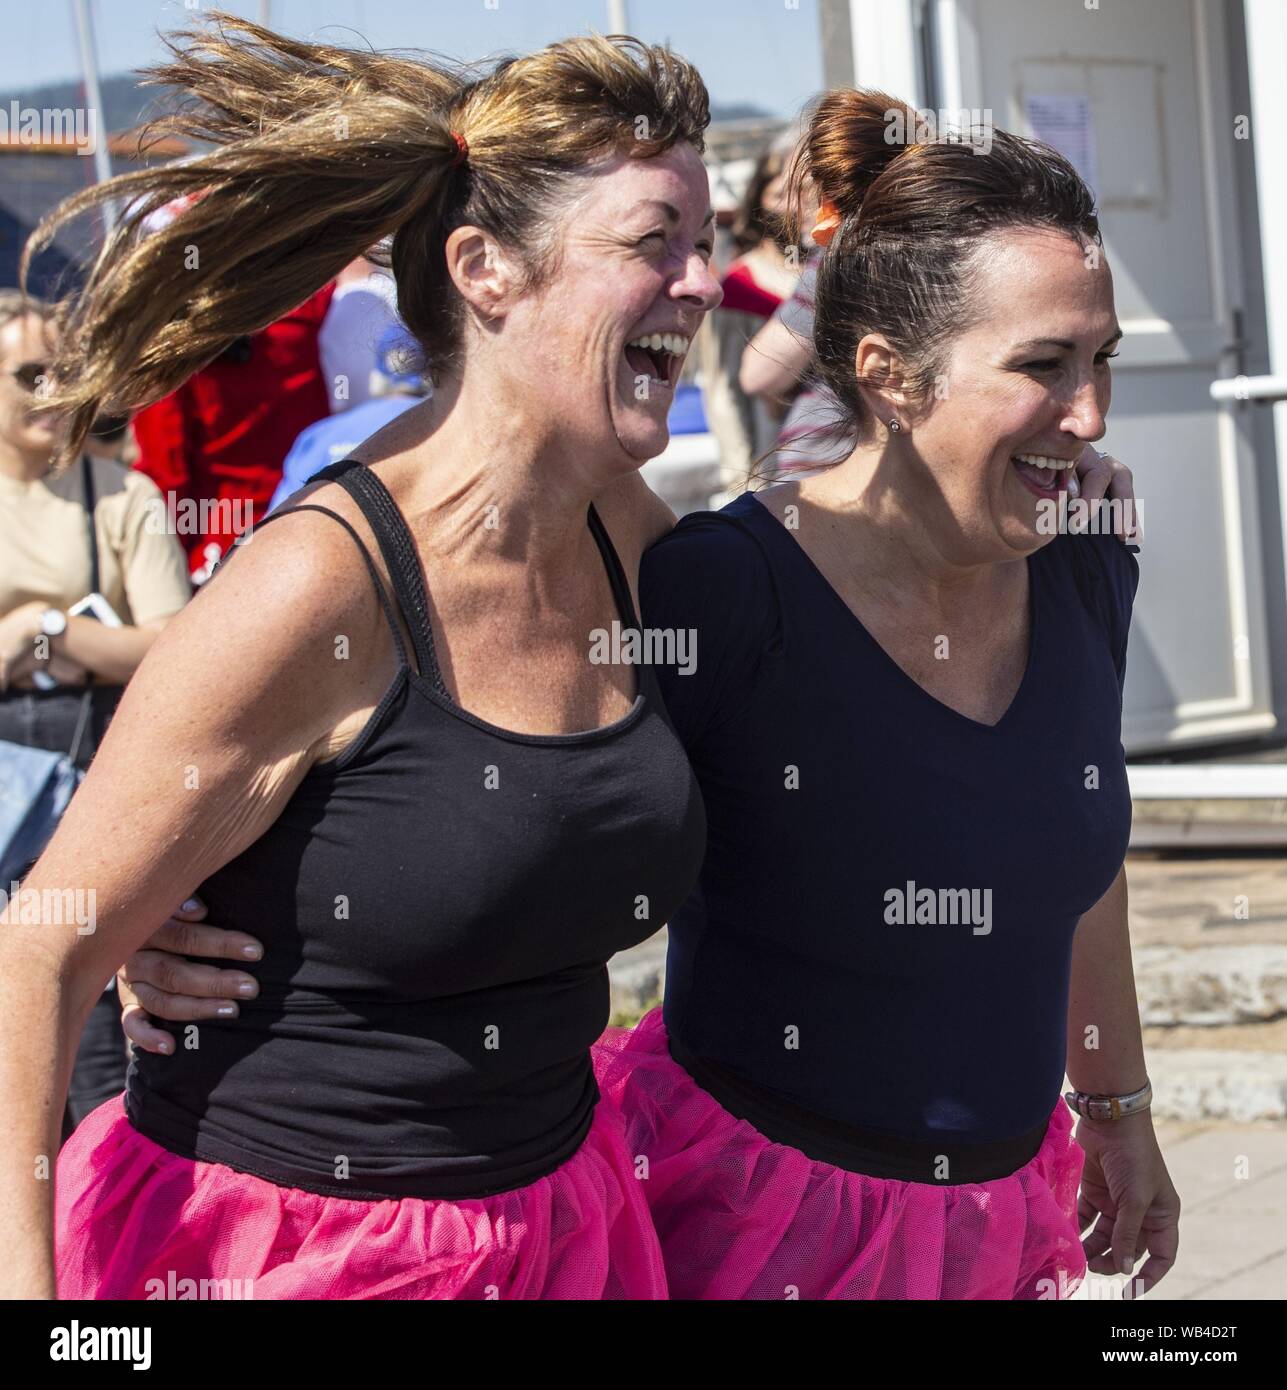 Sidmouth, 24th Aug 19 Two girls try to decide whether to enter the three legged race in the Bank Holiday sun at Sidmouth, Devon. Runners had to visit 6 pubs, and drink a half pint in each during the event. Credit: Photo Central/Alamy Live News Stock Photo